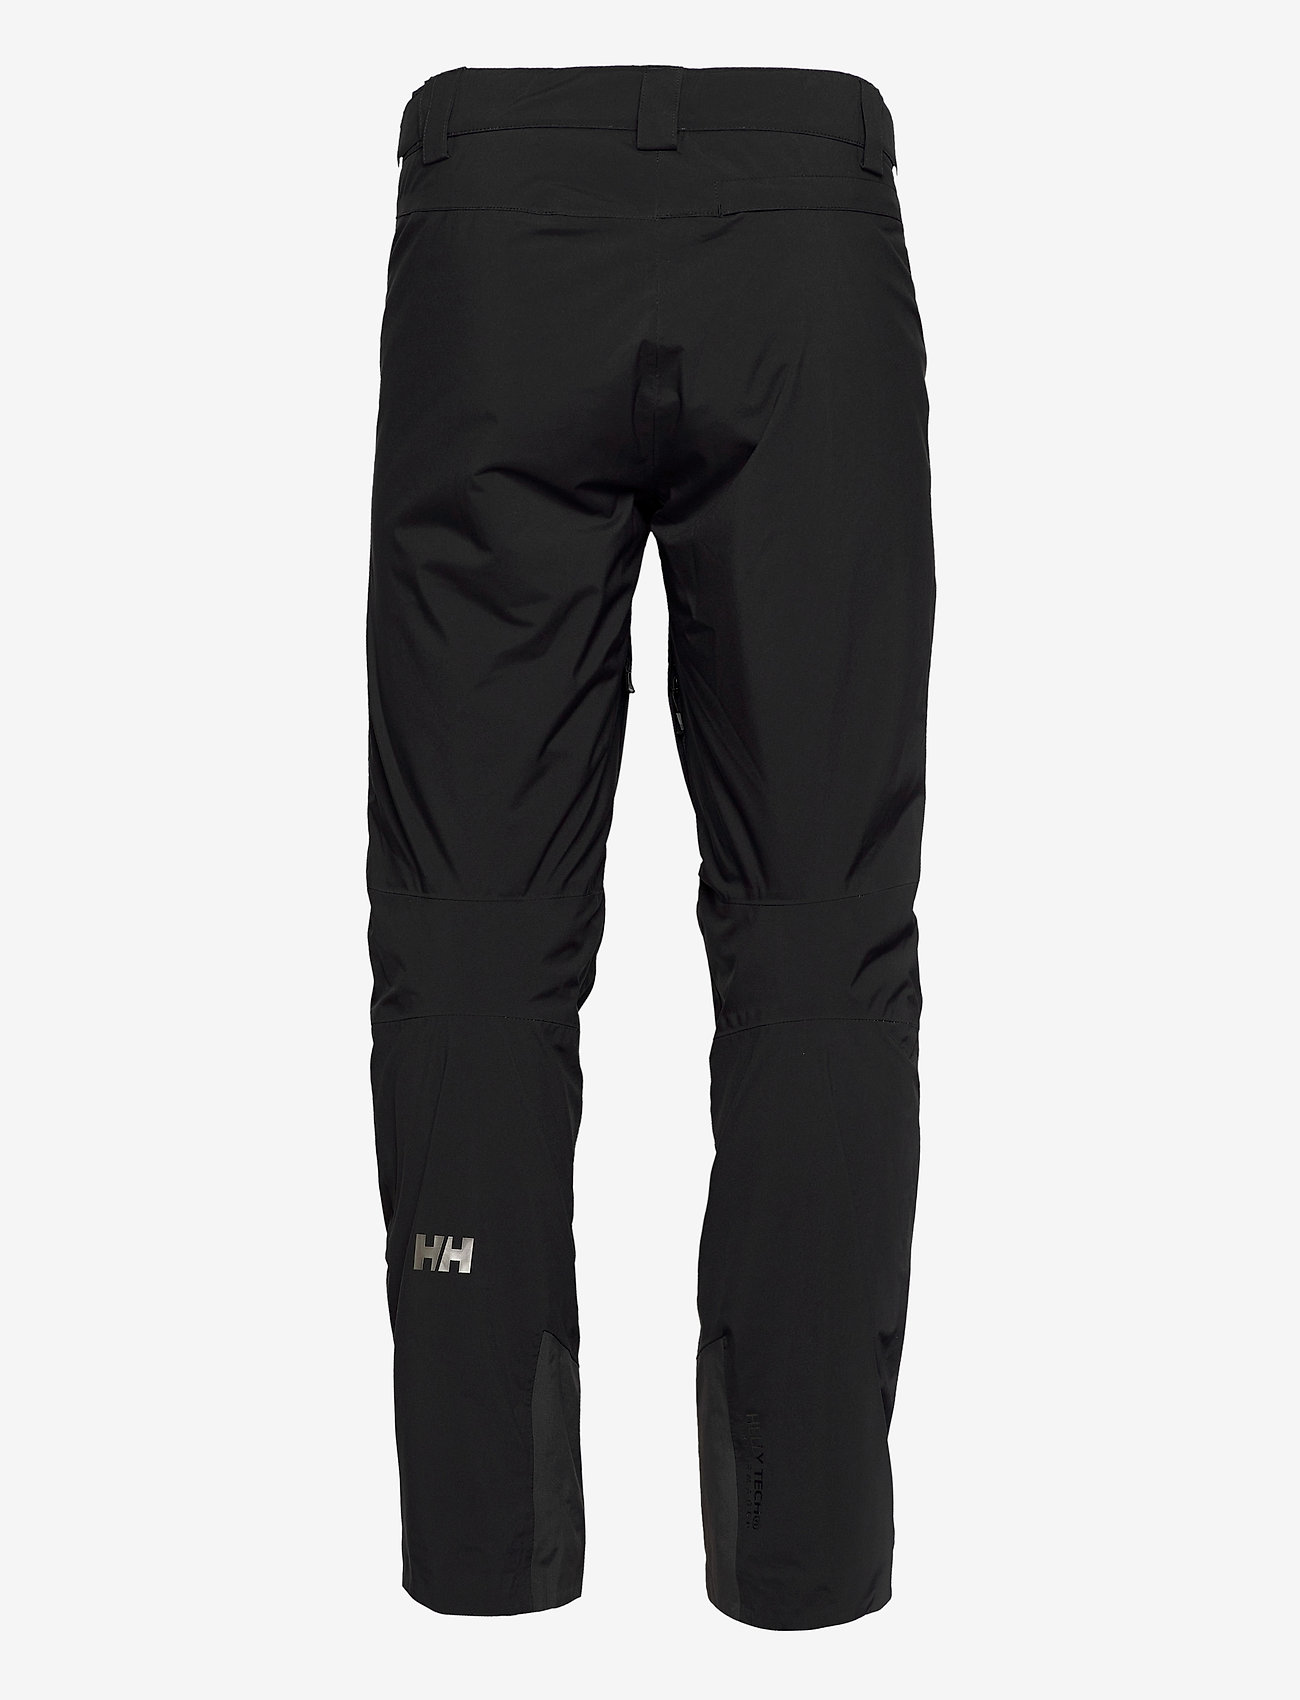 Helly Hansen - LEGENDARY INSULATED PANT - skiing pants - 990 black - 1